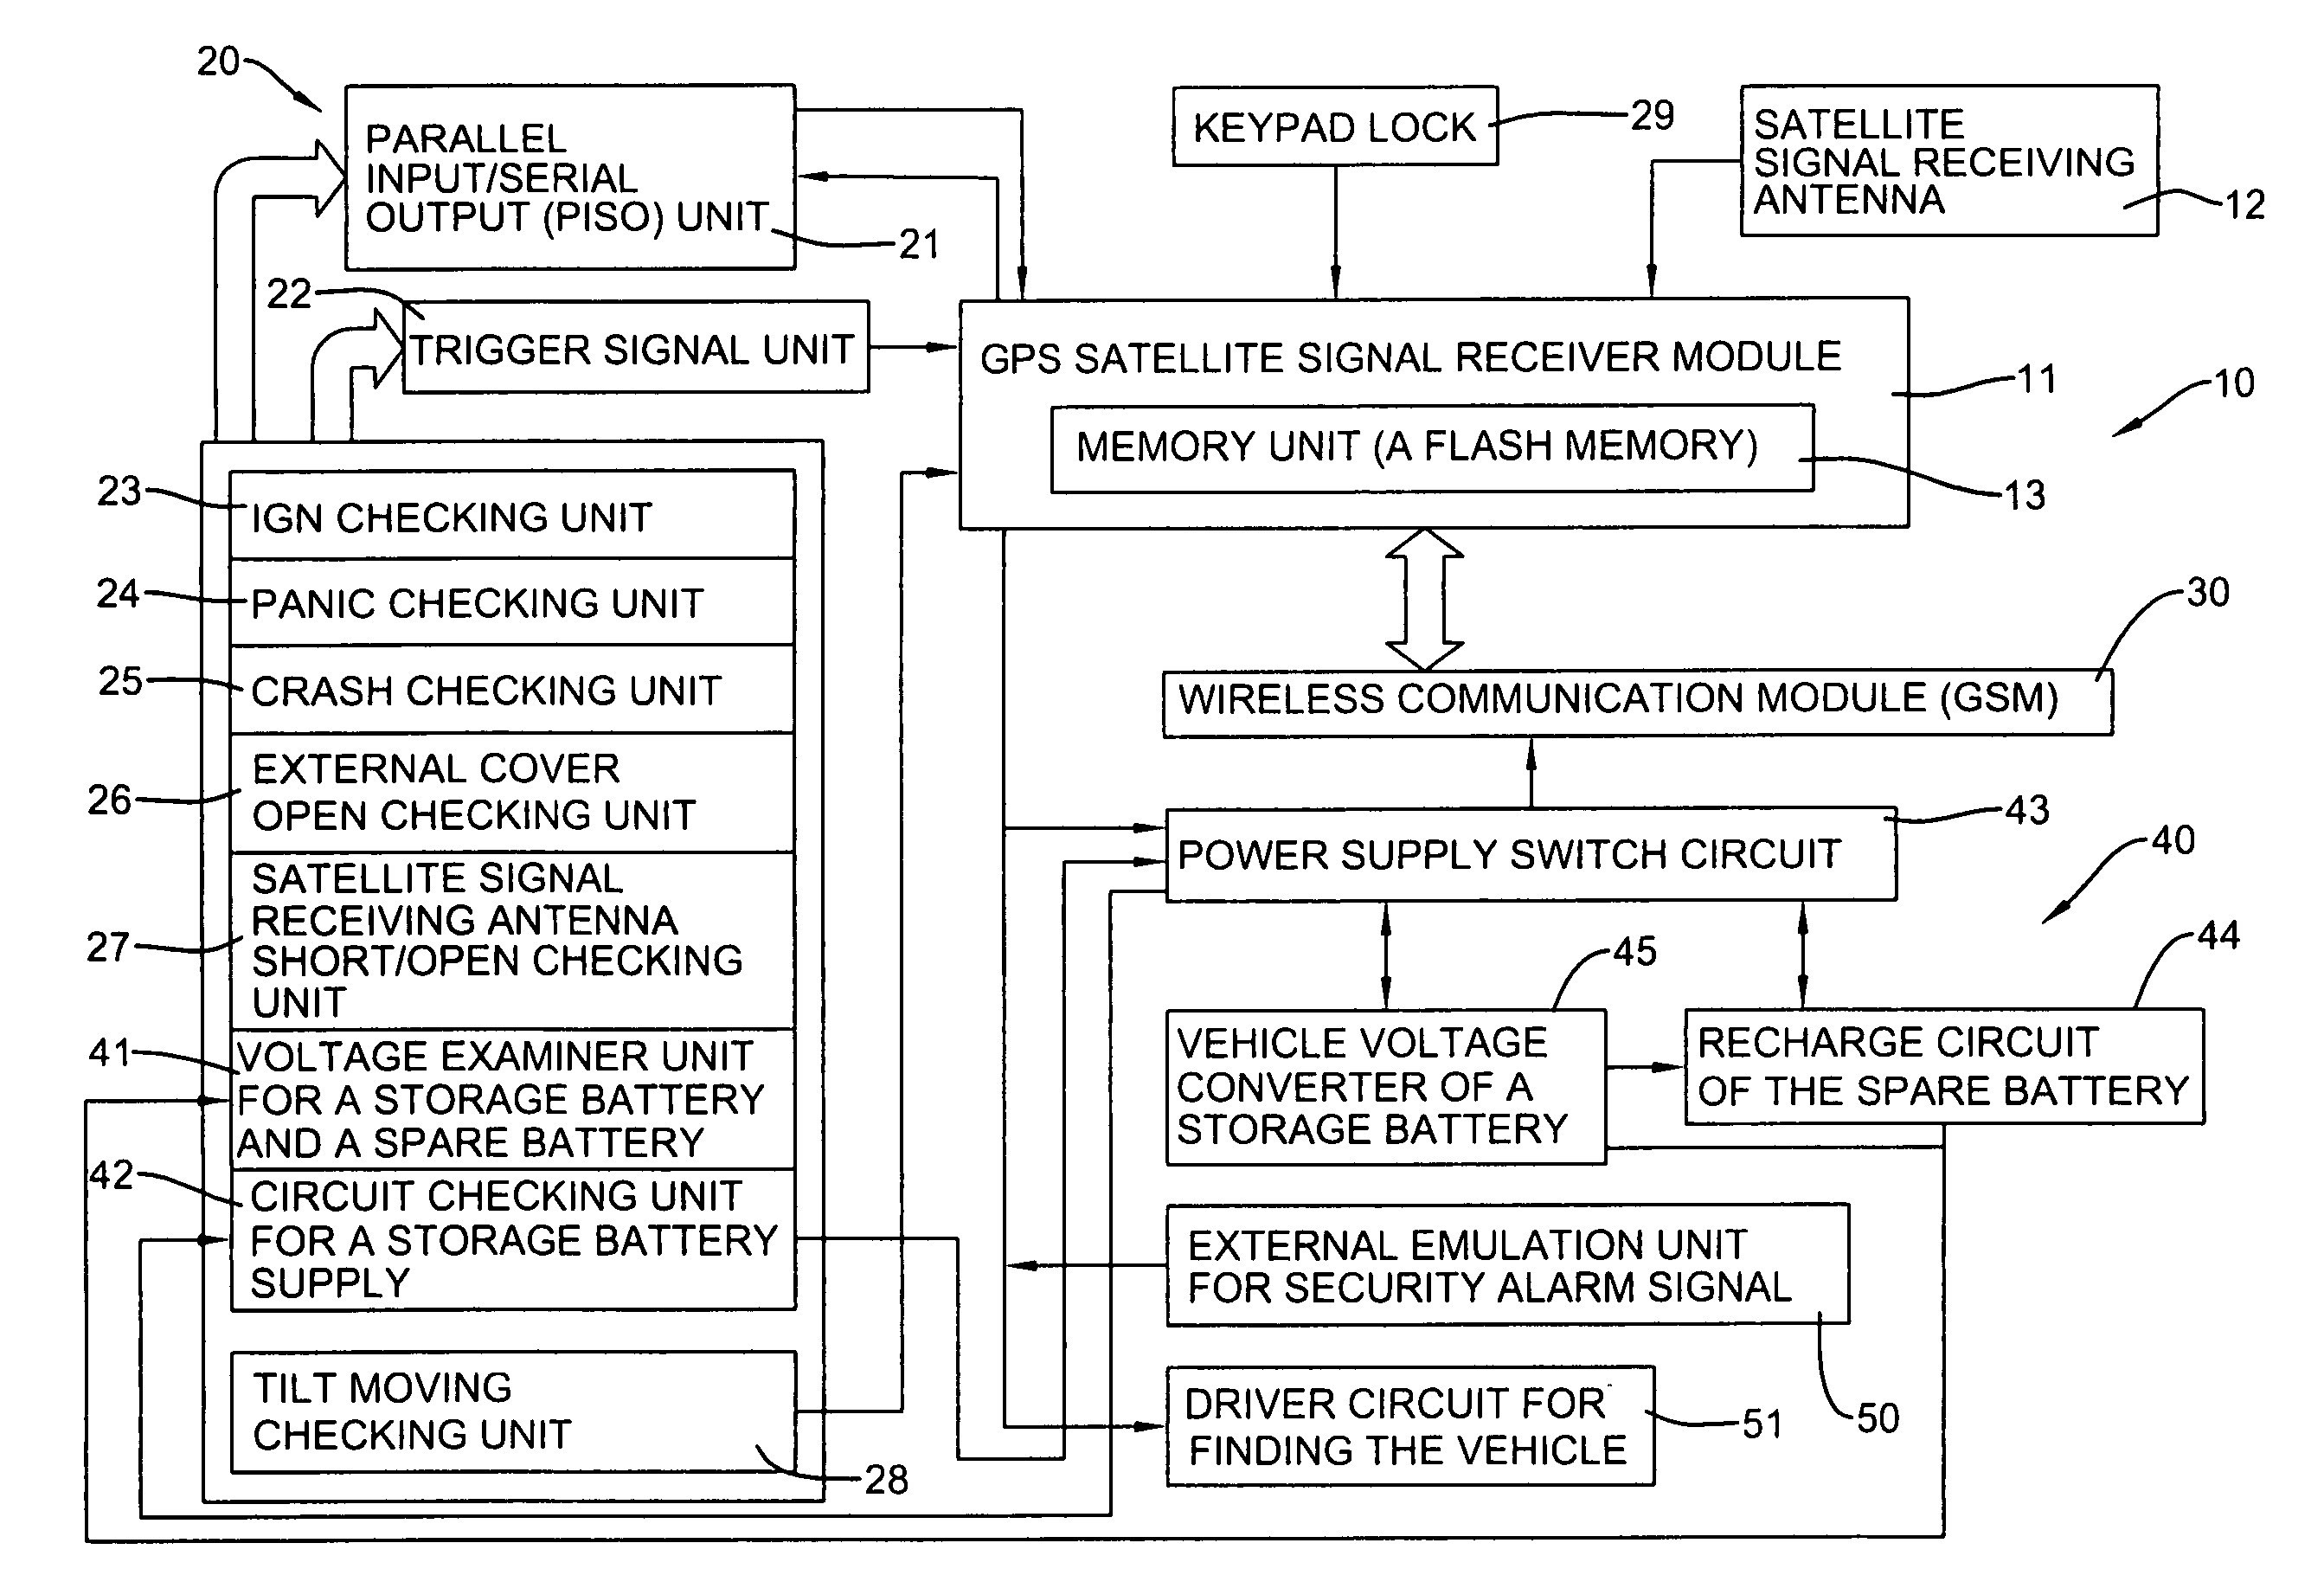 Global positioning system having instant notification of vehicle status function